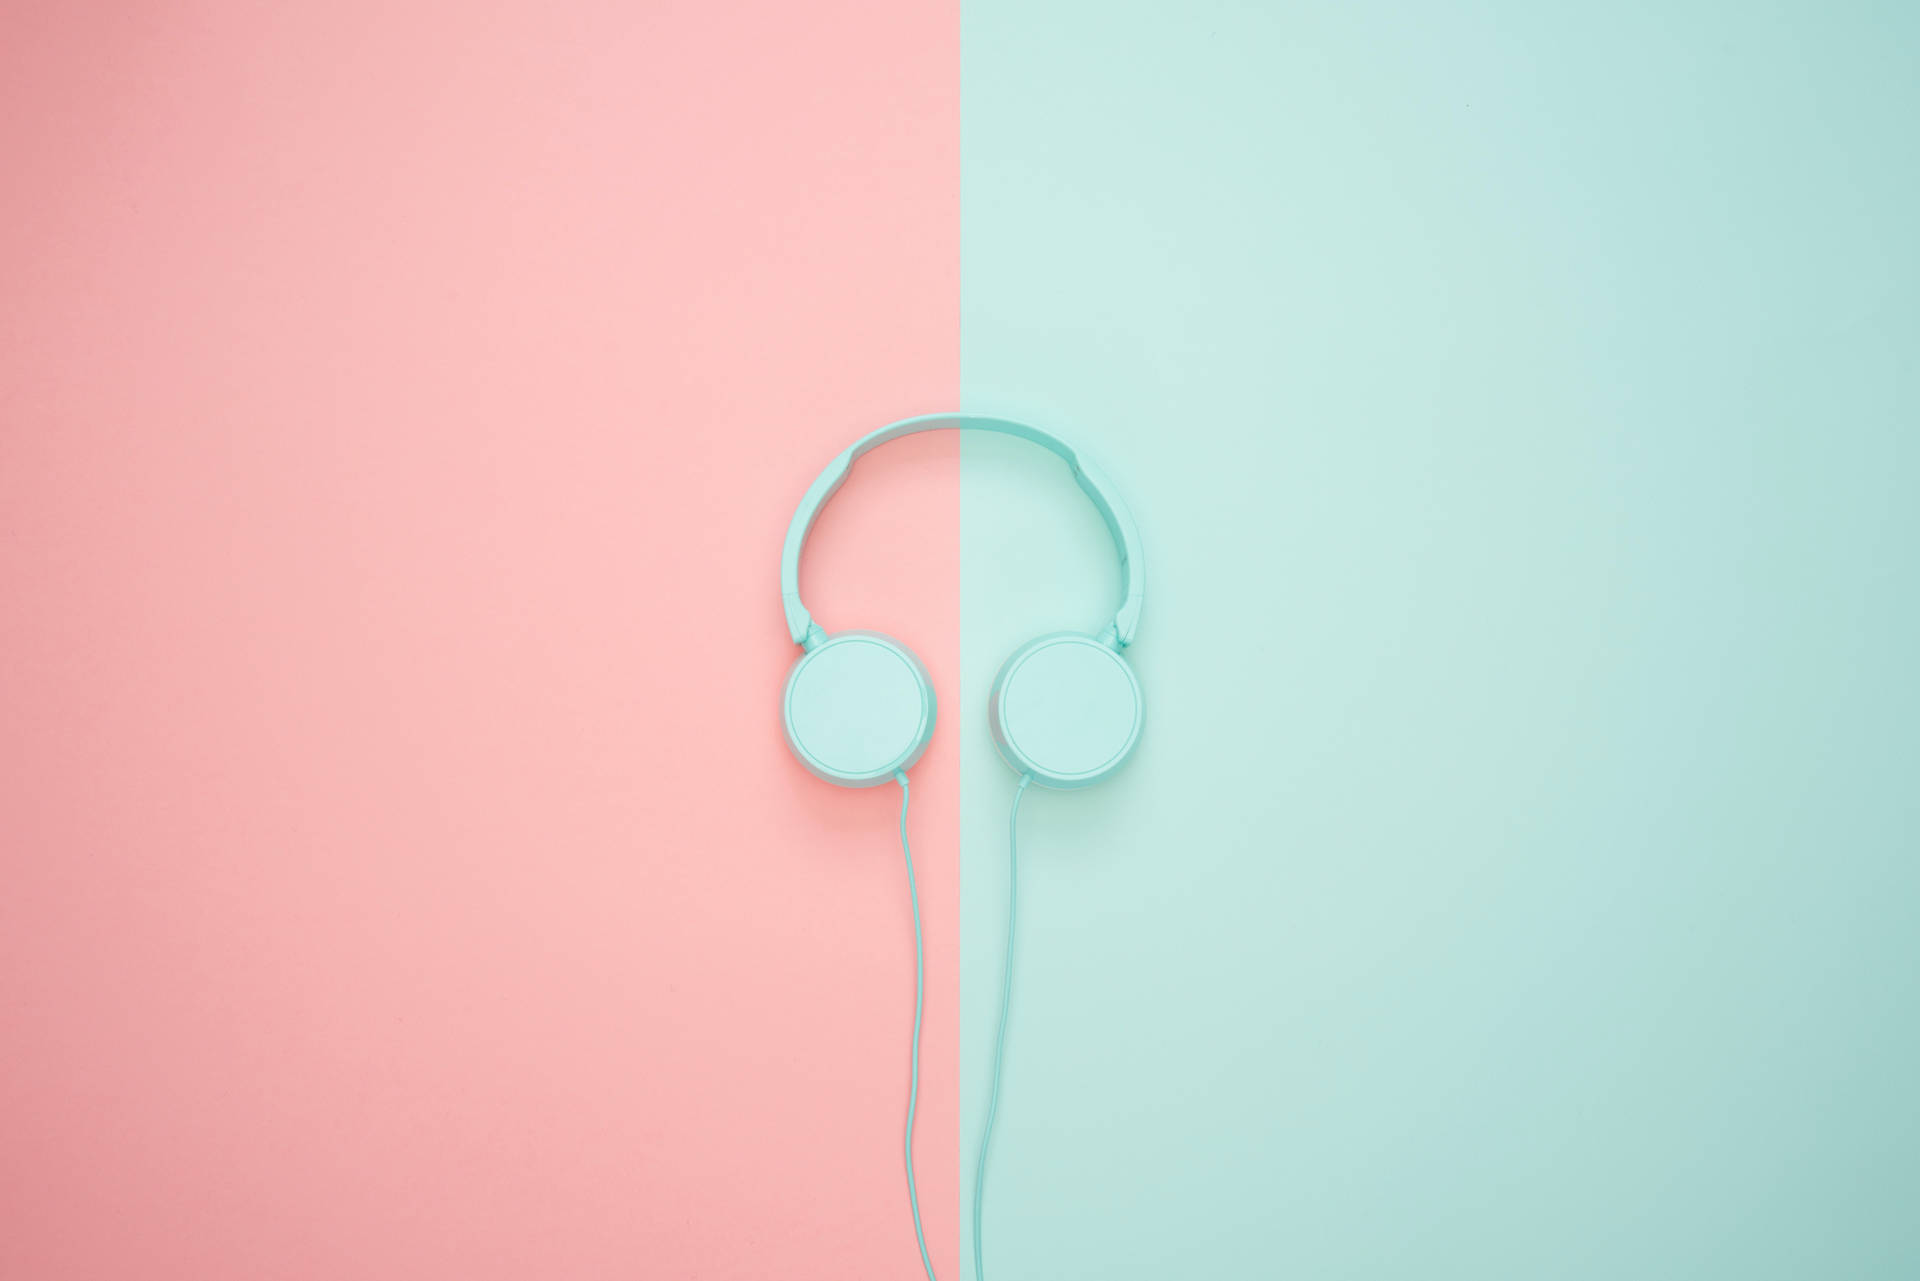 Cute Pastel Aesthetic Background Wallpaper